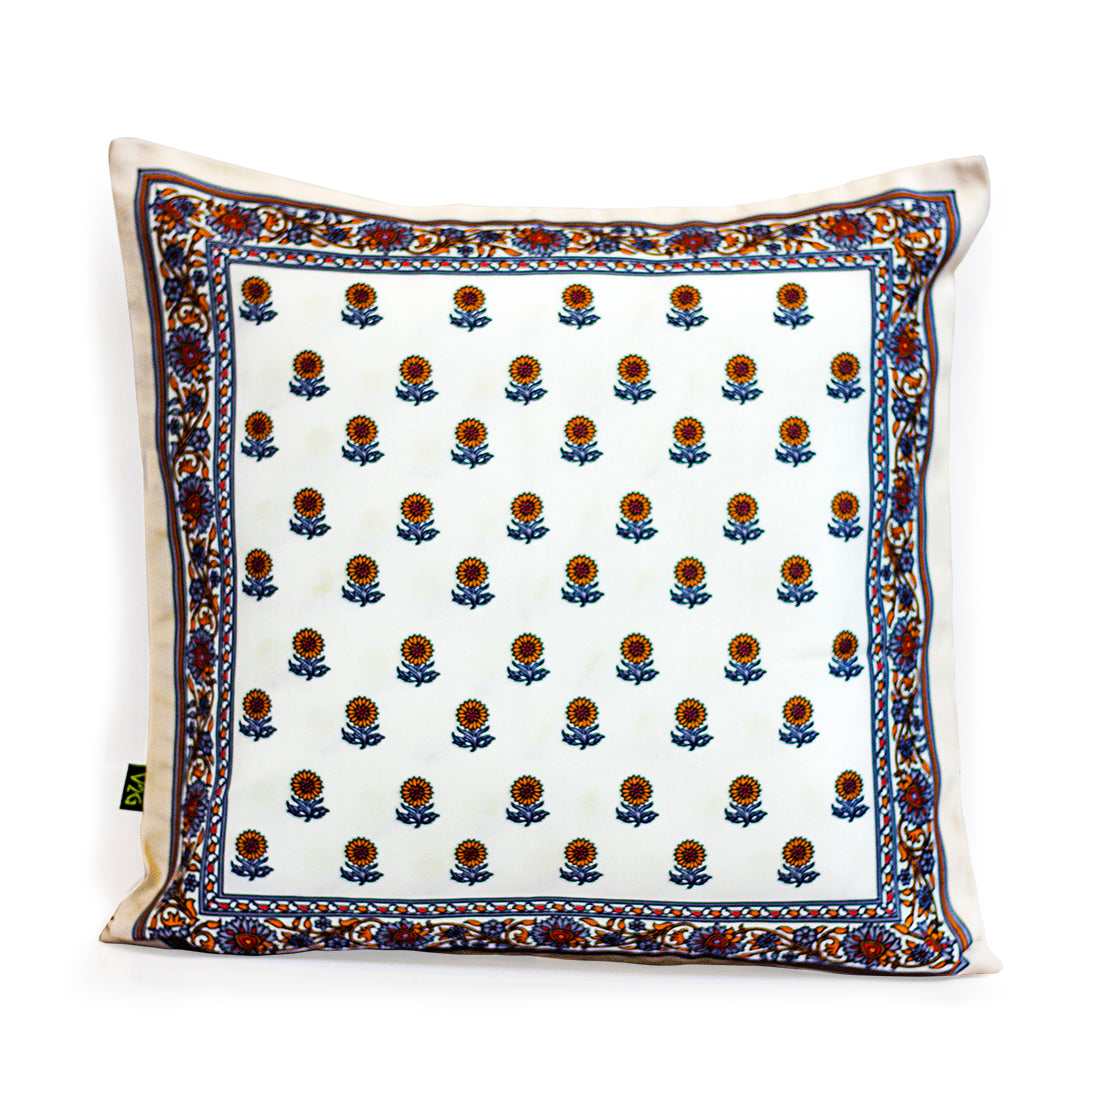 Cushion Cover-Ethnic Collection-03- Set of 2